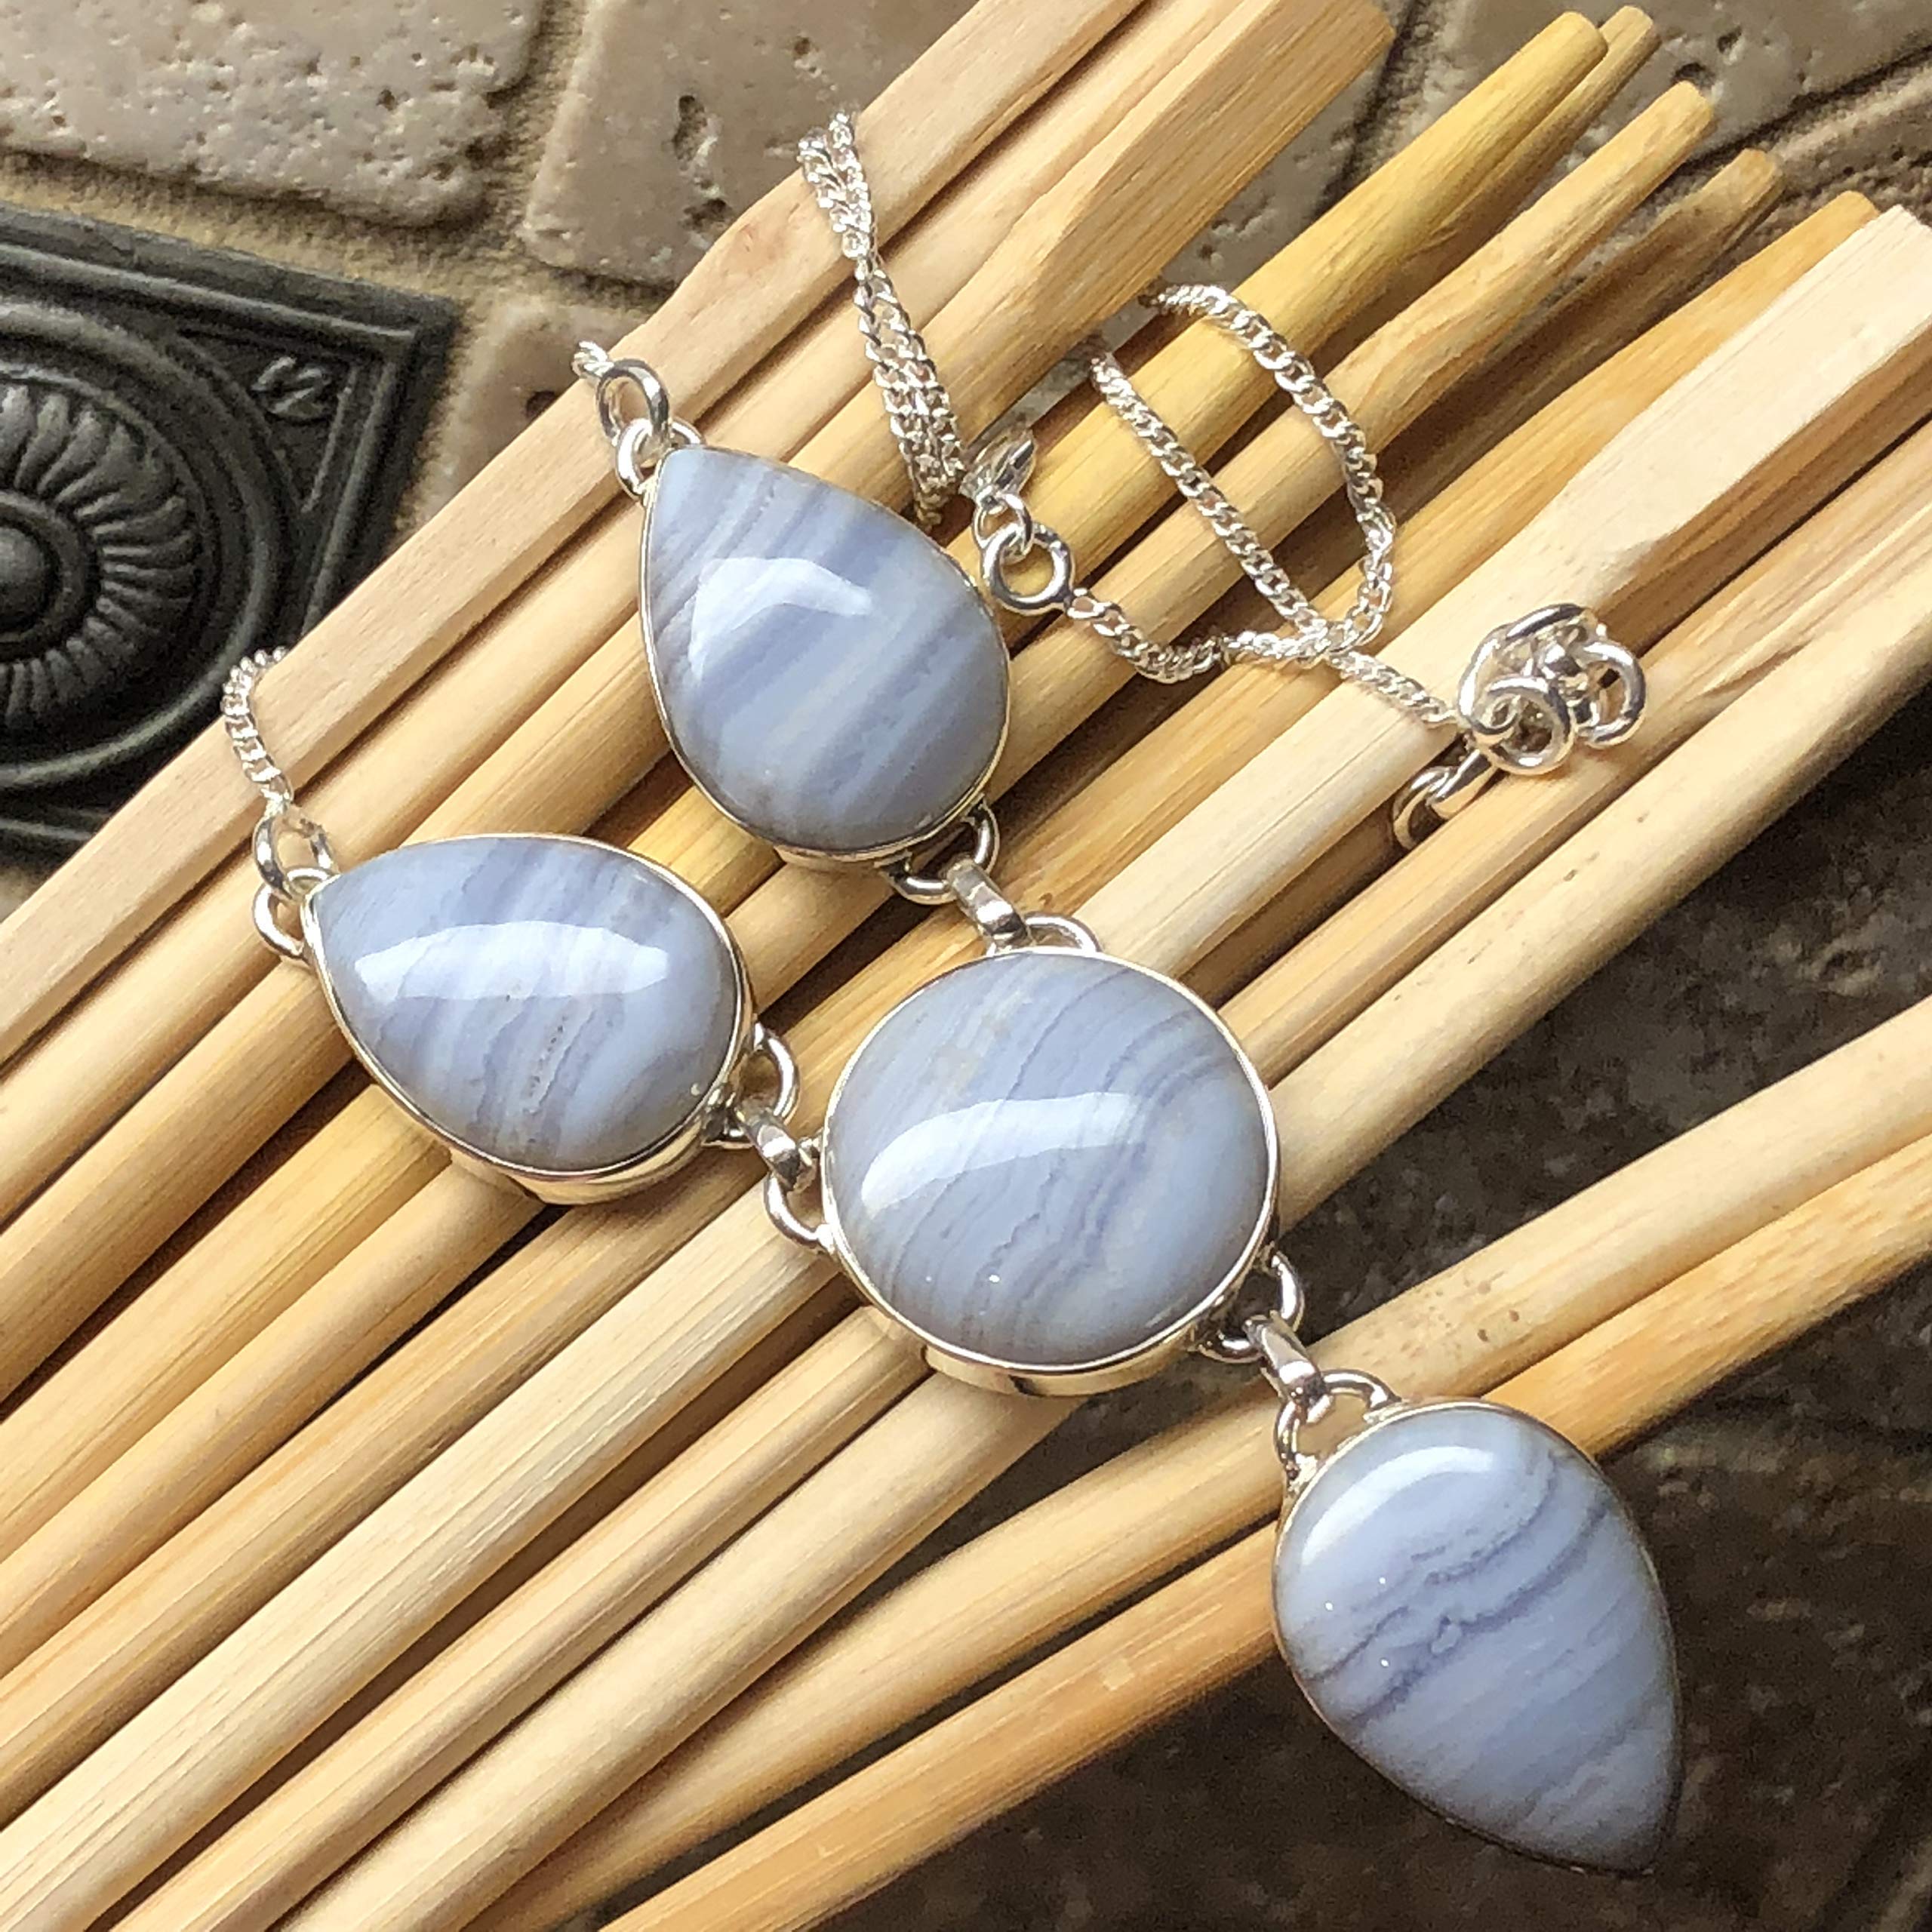 Natural Blue Lace Agate 925 Sterling Silver Necklace 17 1/2" - Natural Rocks by Kala